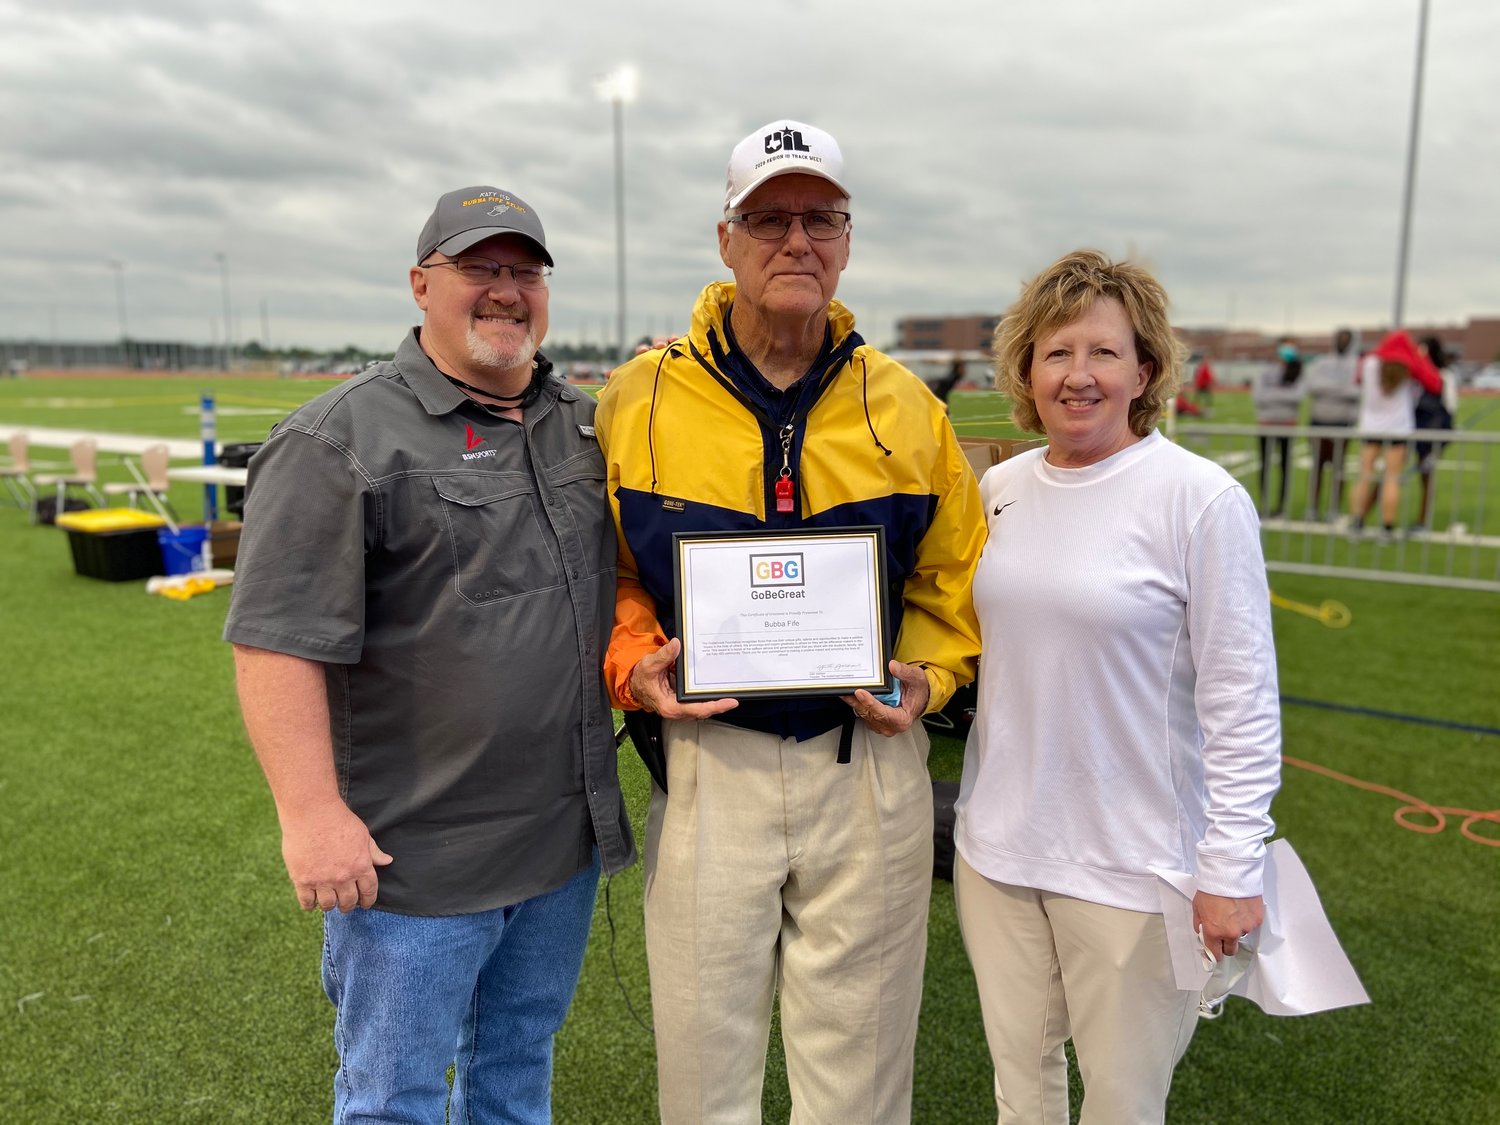 Longtime Katy ISD coach Bubba Fife, middle, is pictured with Katy ISD athletic director Debbie Decker (right) and a representative from BSN Sports. Fife was recognized with the Be Great award on April 15 prior to the second day of the 19-20-6A area track and field meet at Paetow High. The award honors those who serve with kindness and selflessness.